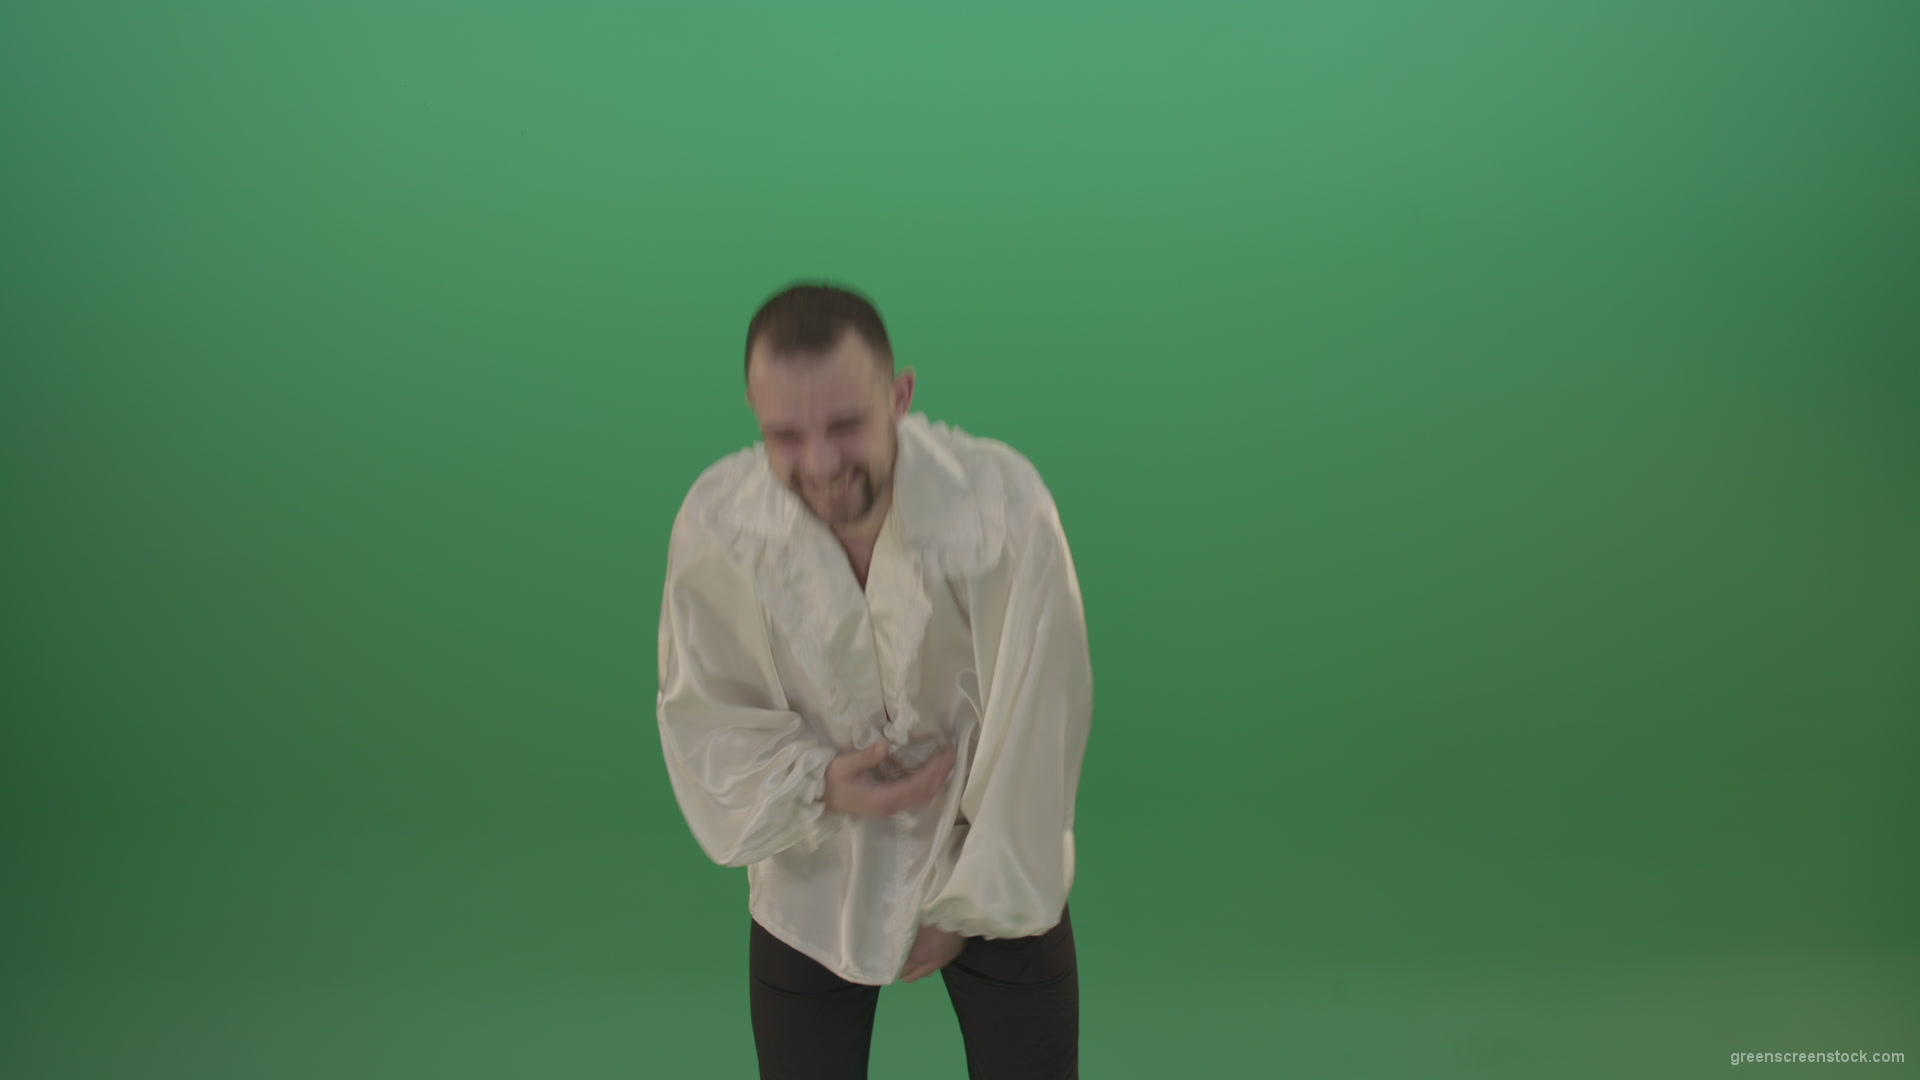 Scarry-laughing-from-the-professional-actor-in-white-shirt-isolated-on-green-screen-background_006 Green Screen Stock